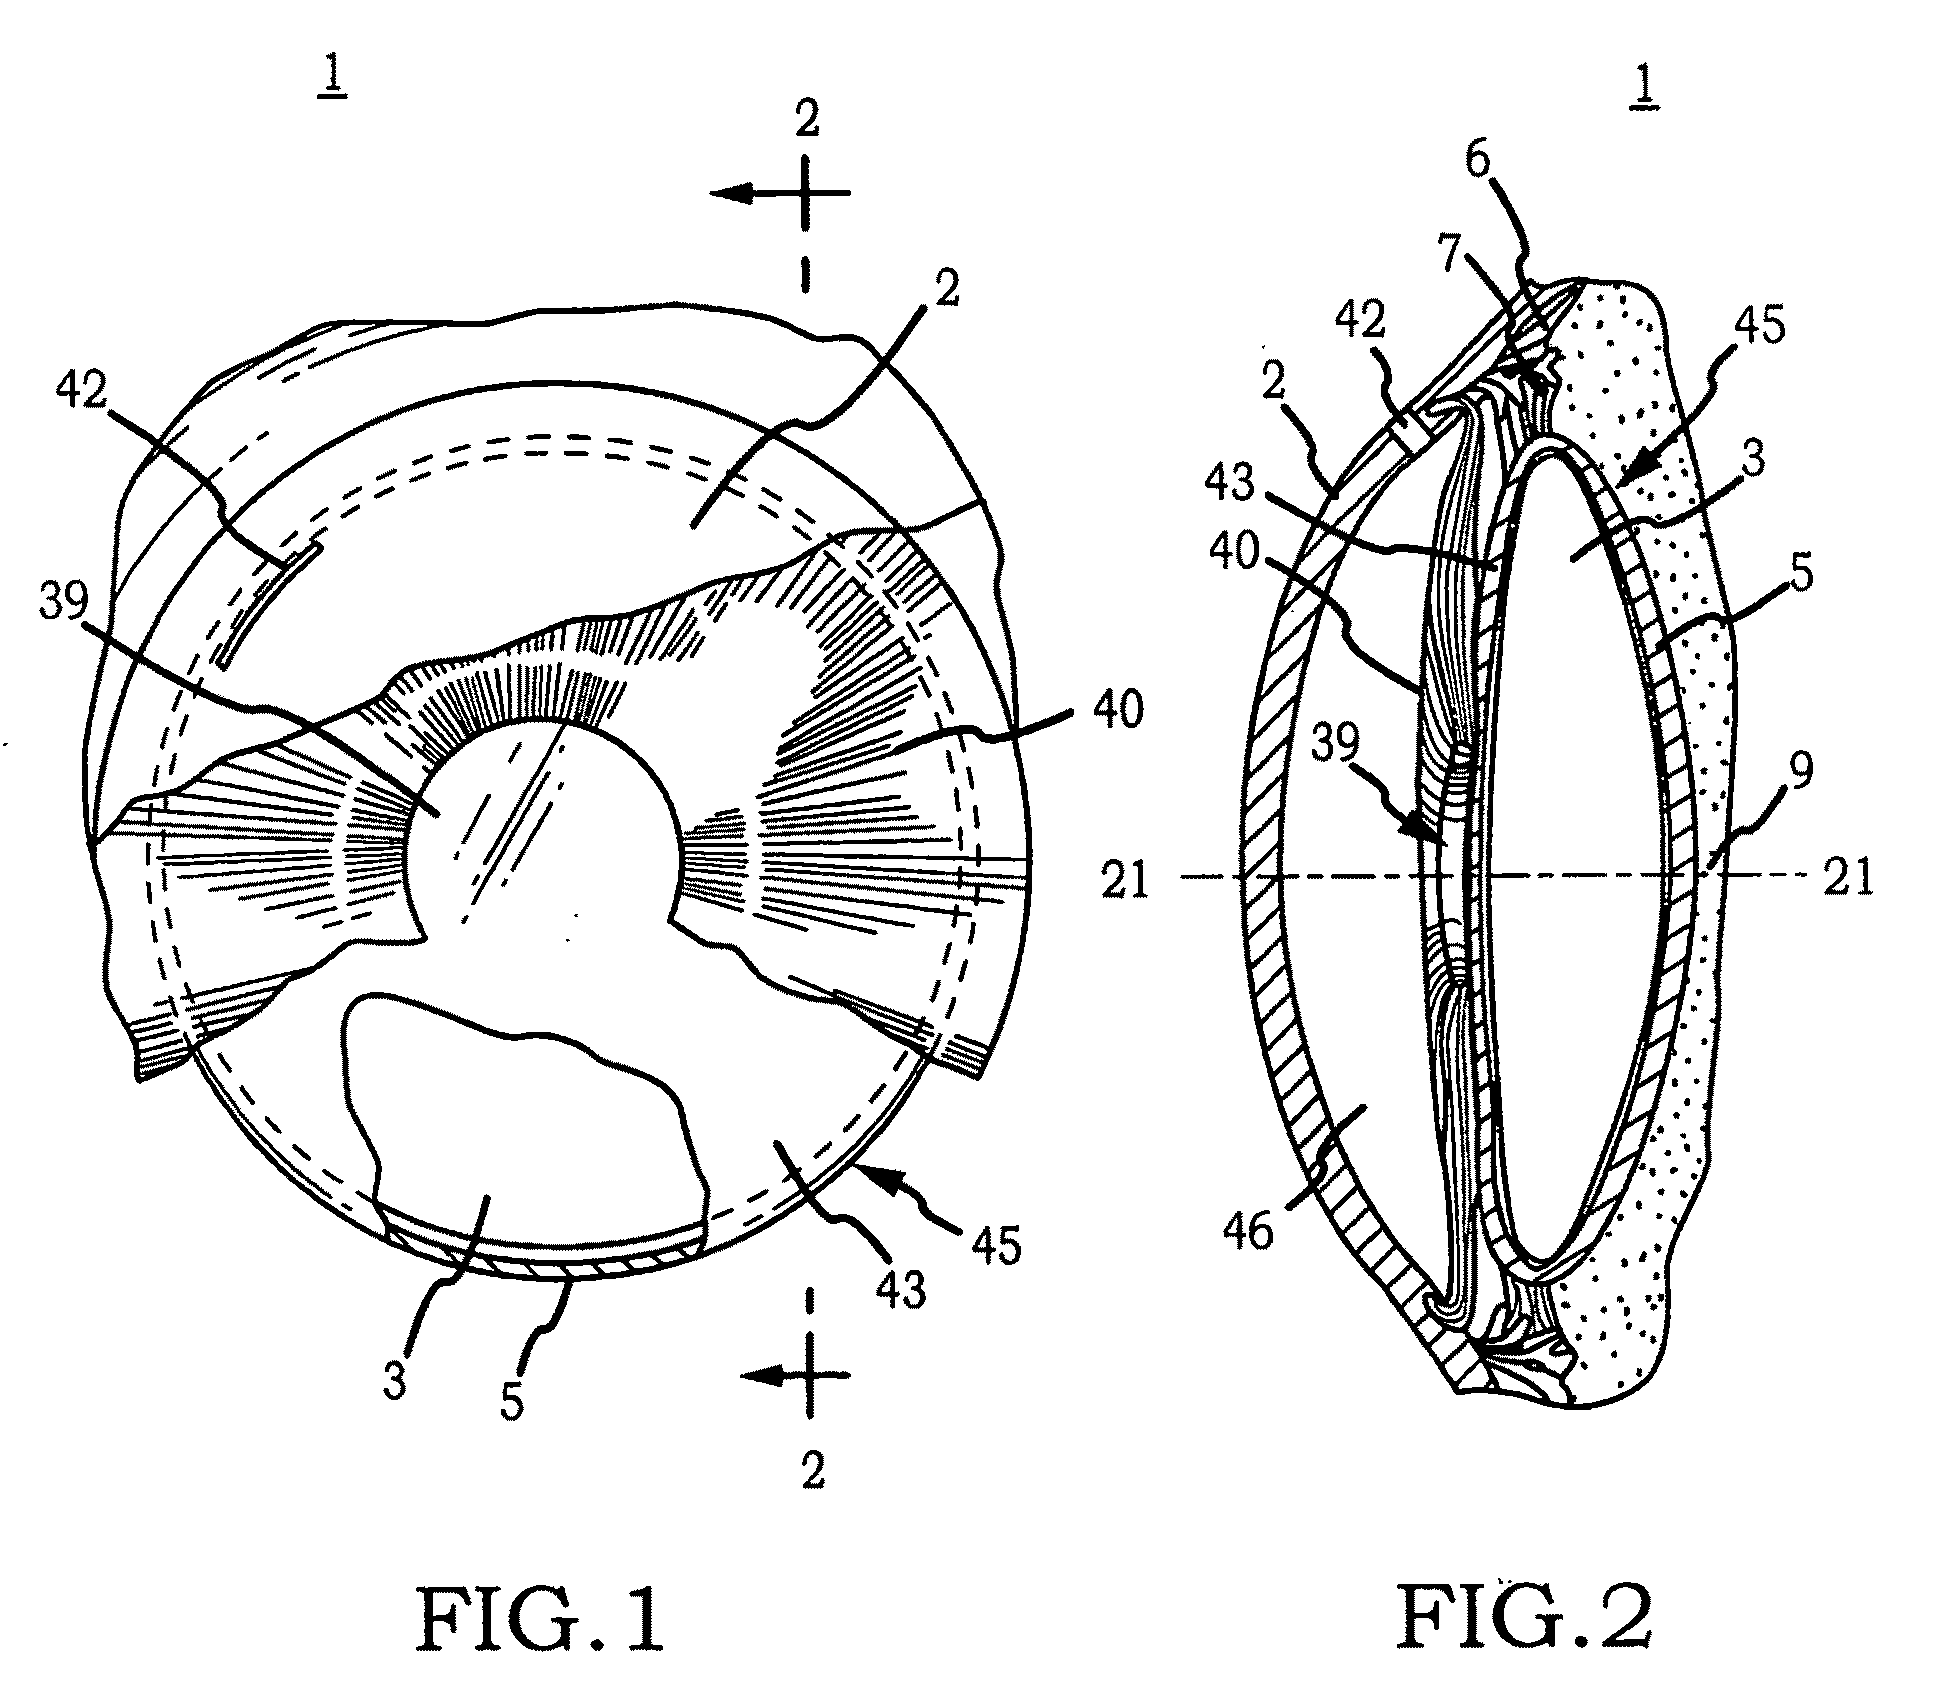 Intraocular implant cell migration inhibition system